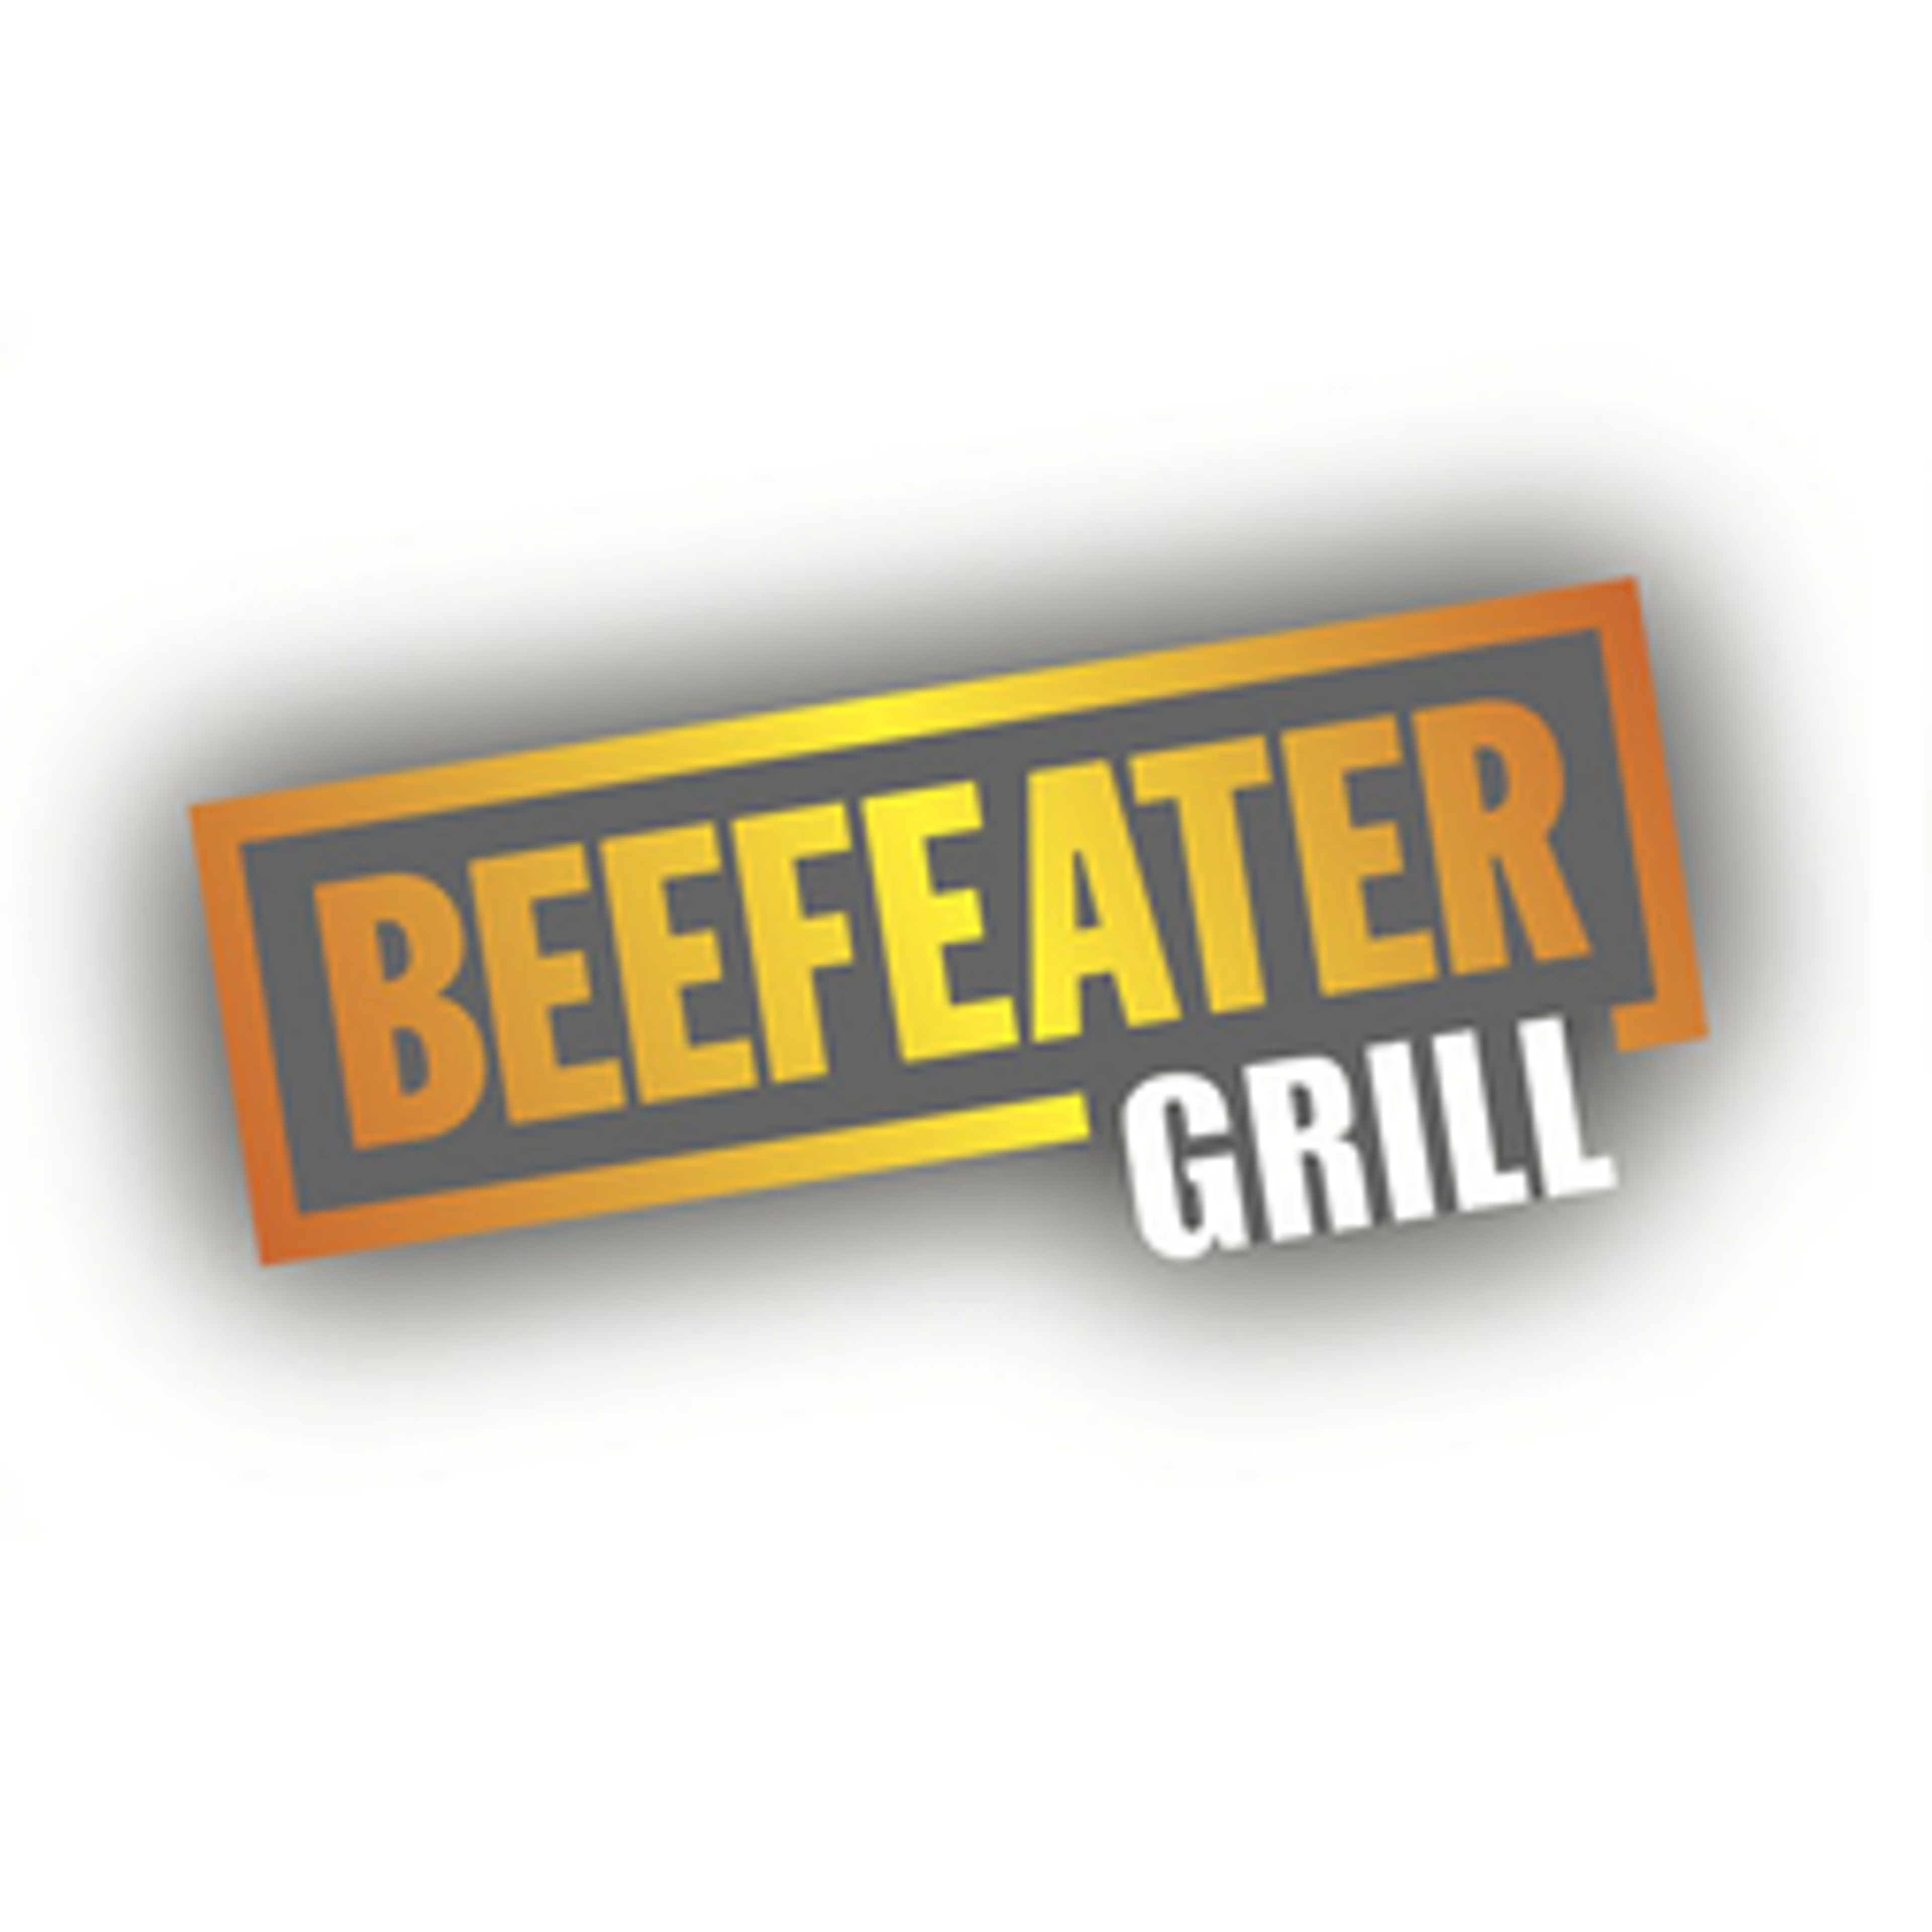  Beefeater 